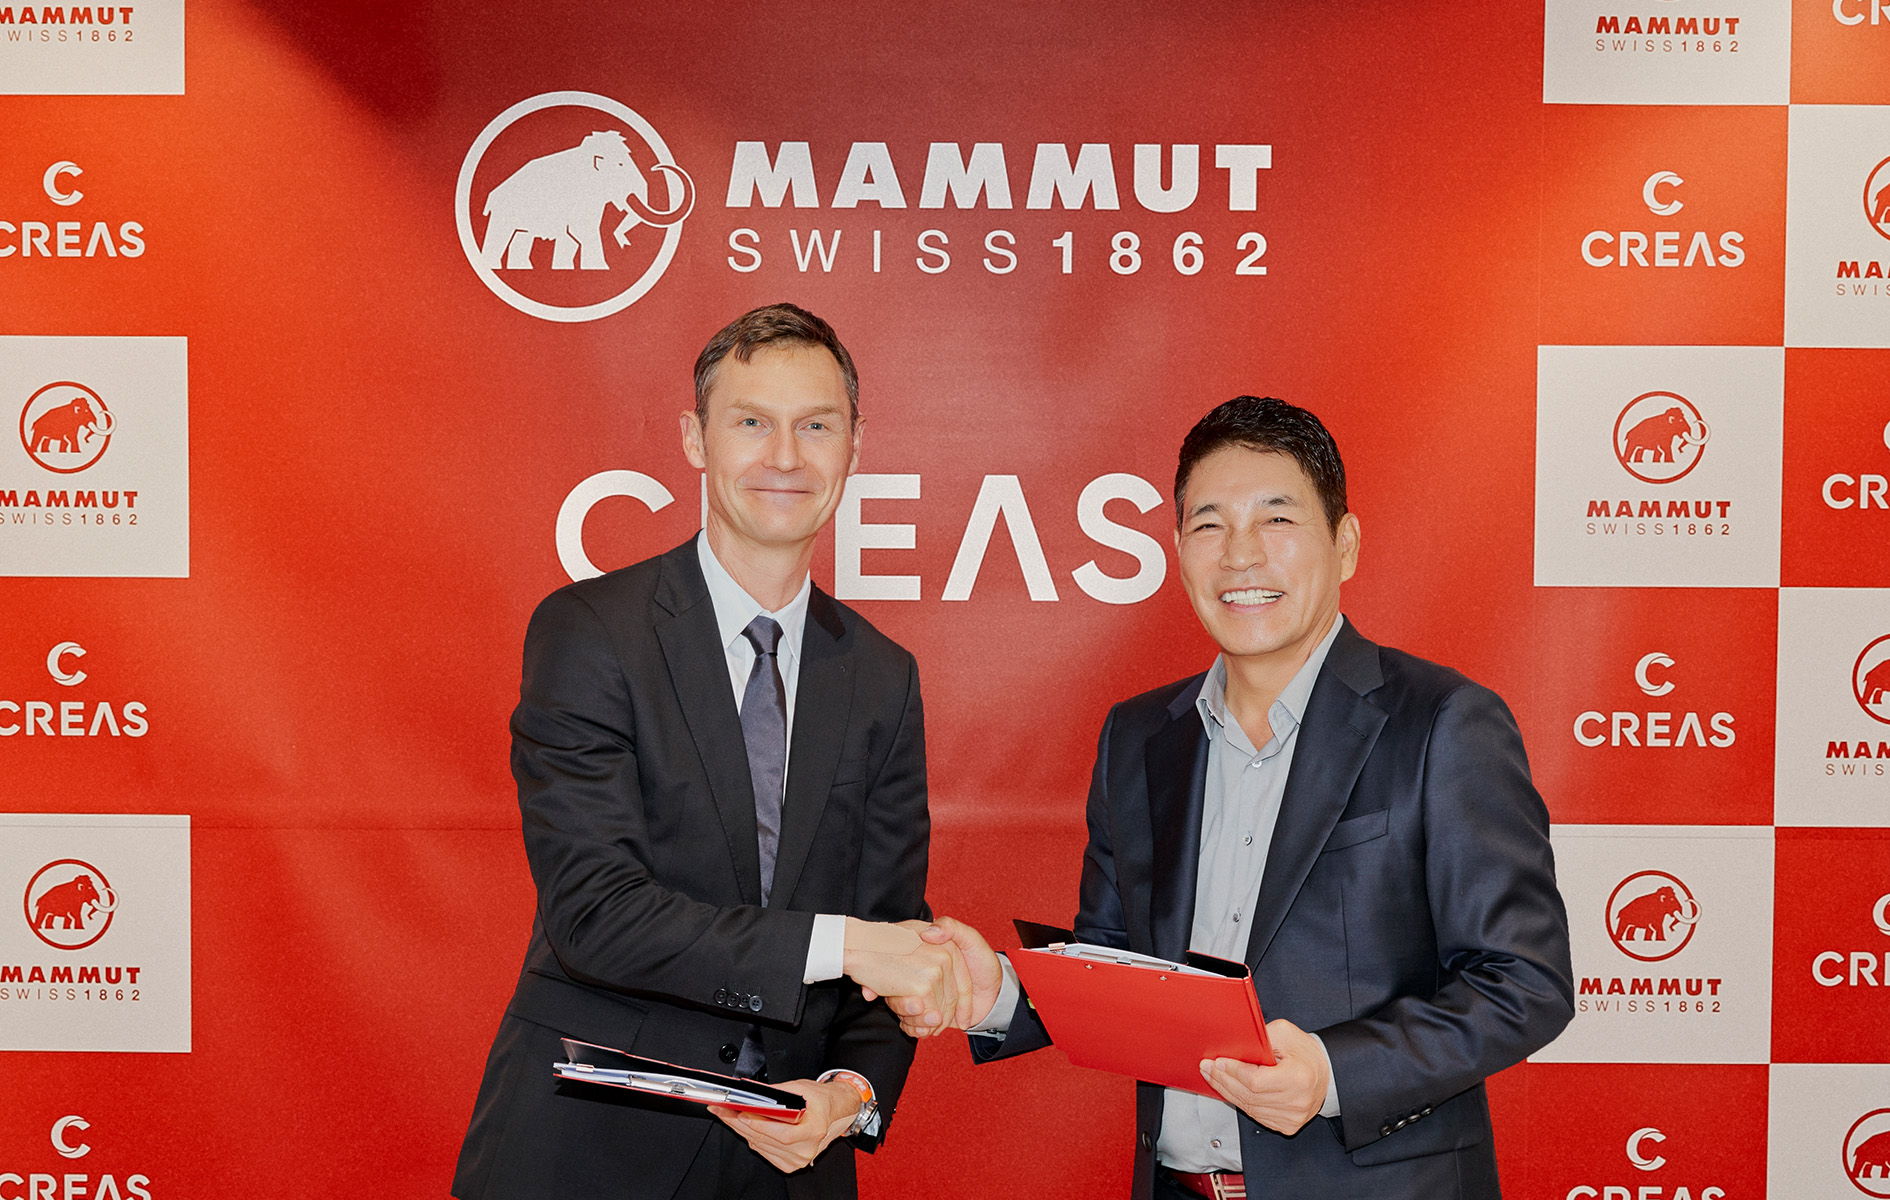 Heiko Schäfer, CEO Mammut, and Jin-Seok Woo, Chairman Creas F&C, are looking forward to working together in Korea. (Image: Creas F&C)